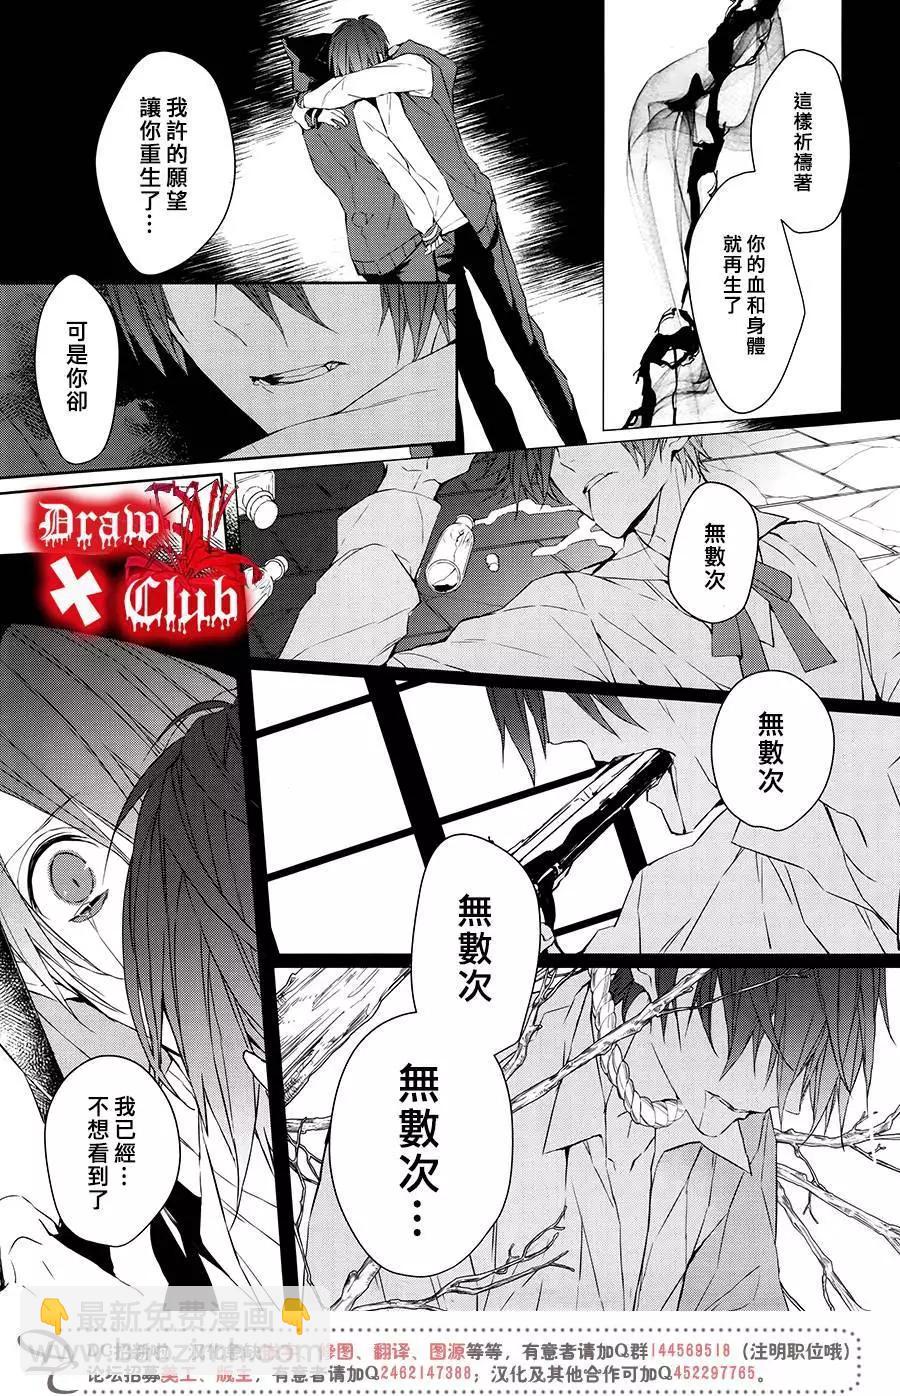 Bloody Mary - 第37回 - 2